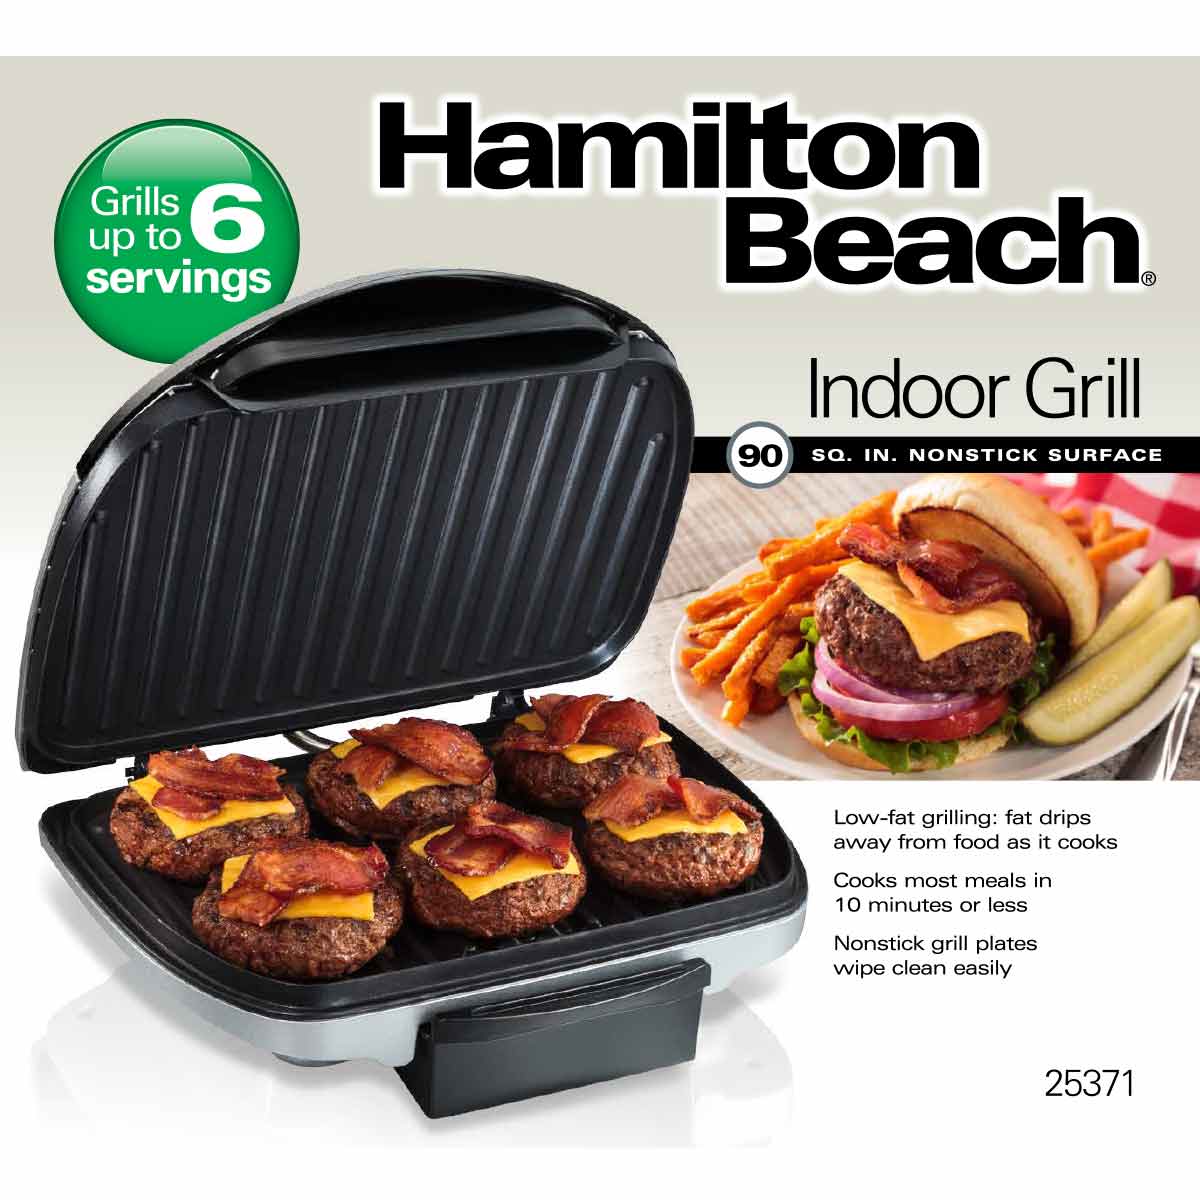 Hamilton Beach Electric Indoor Grill, 6-Serving, Large 90 sq.in. Nonstick Easy Clean Plates, Floating Hinge for Thicker Foods, 1200W, Stainless Steel, 25371 - image 5 of 5